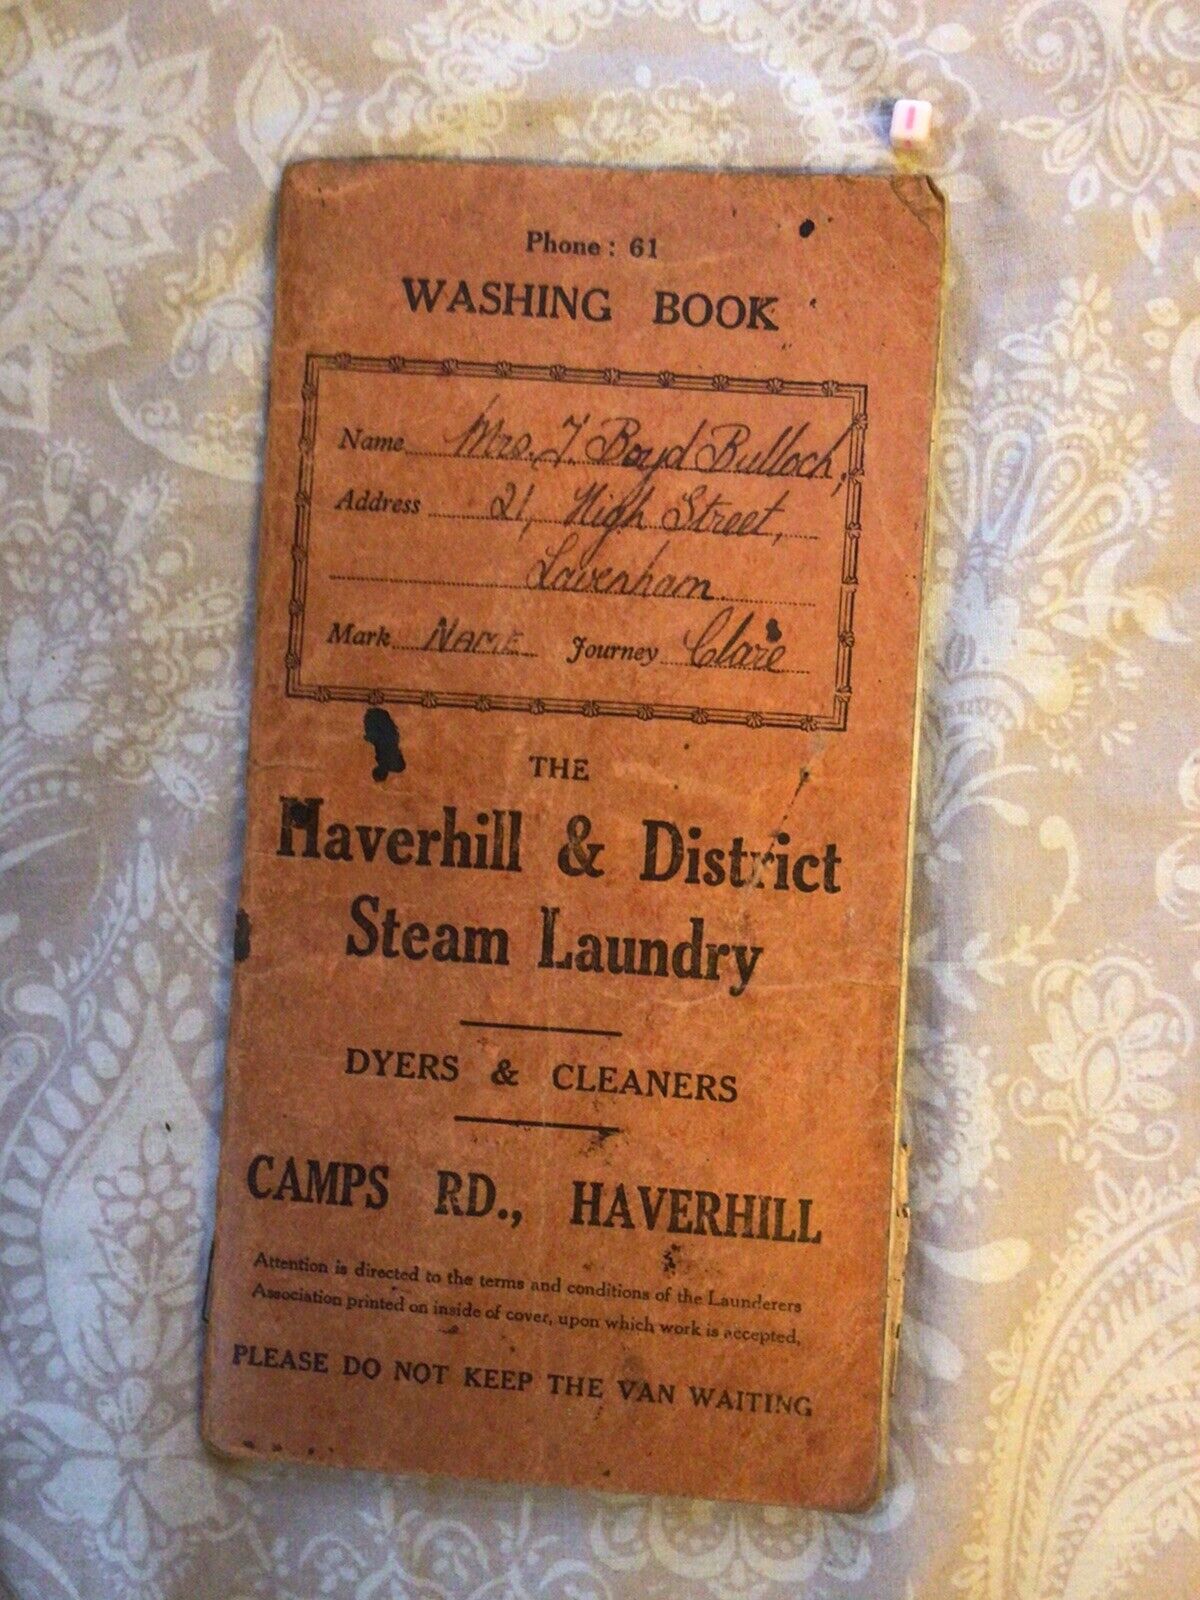 VERY RARE WARTIME Washing Laundry Book , Full Of Tickets HAVERHILL LAVENHAM